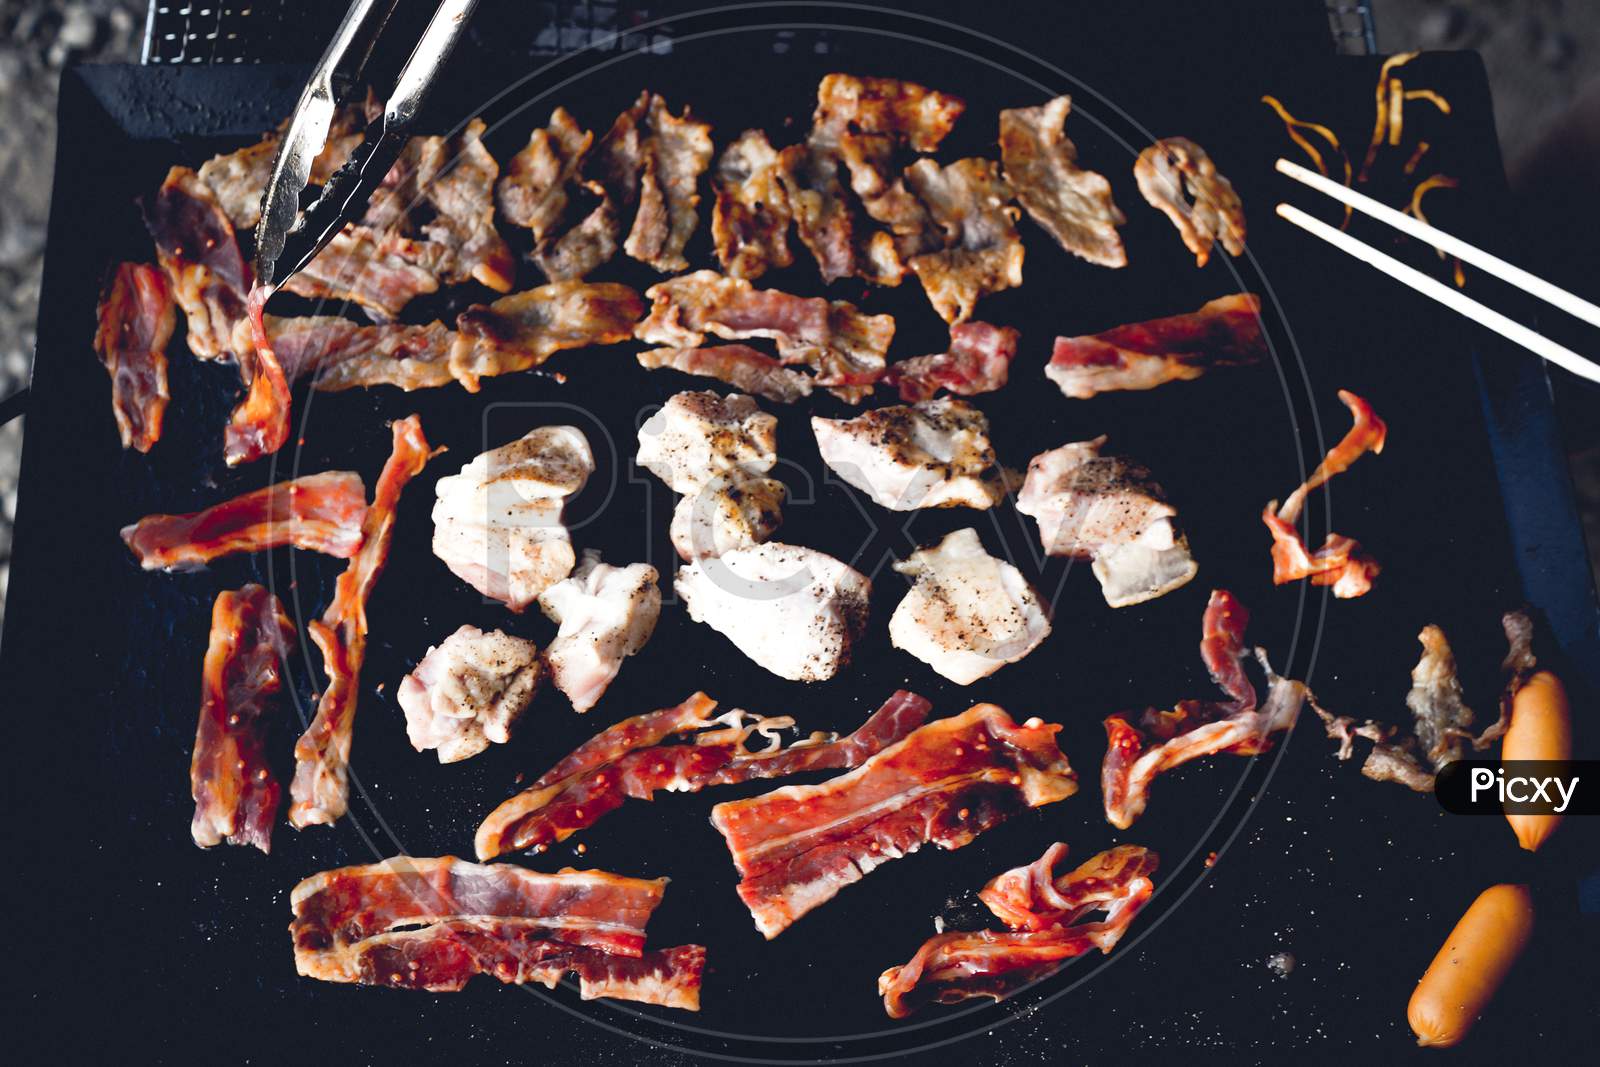 Charcoal-Grilled Meat Image At Barbecue